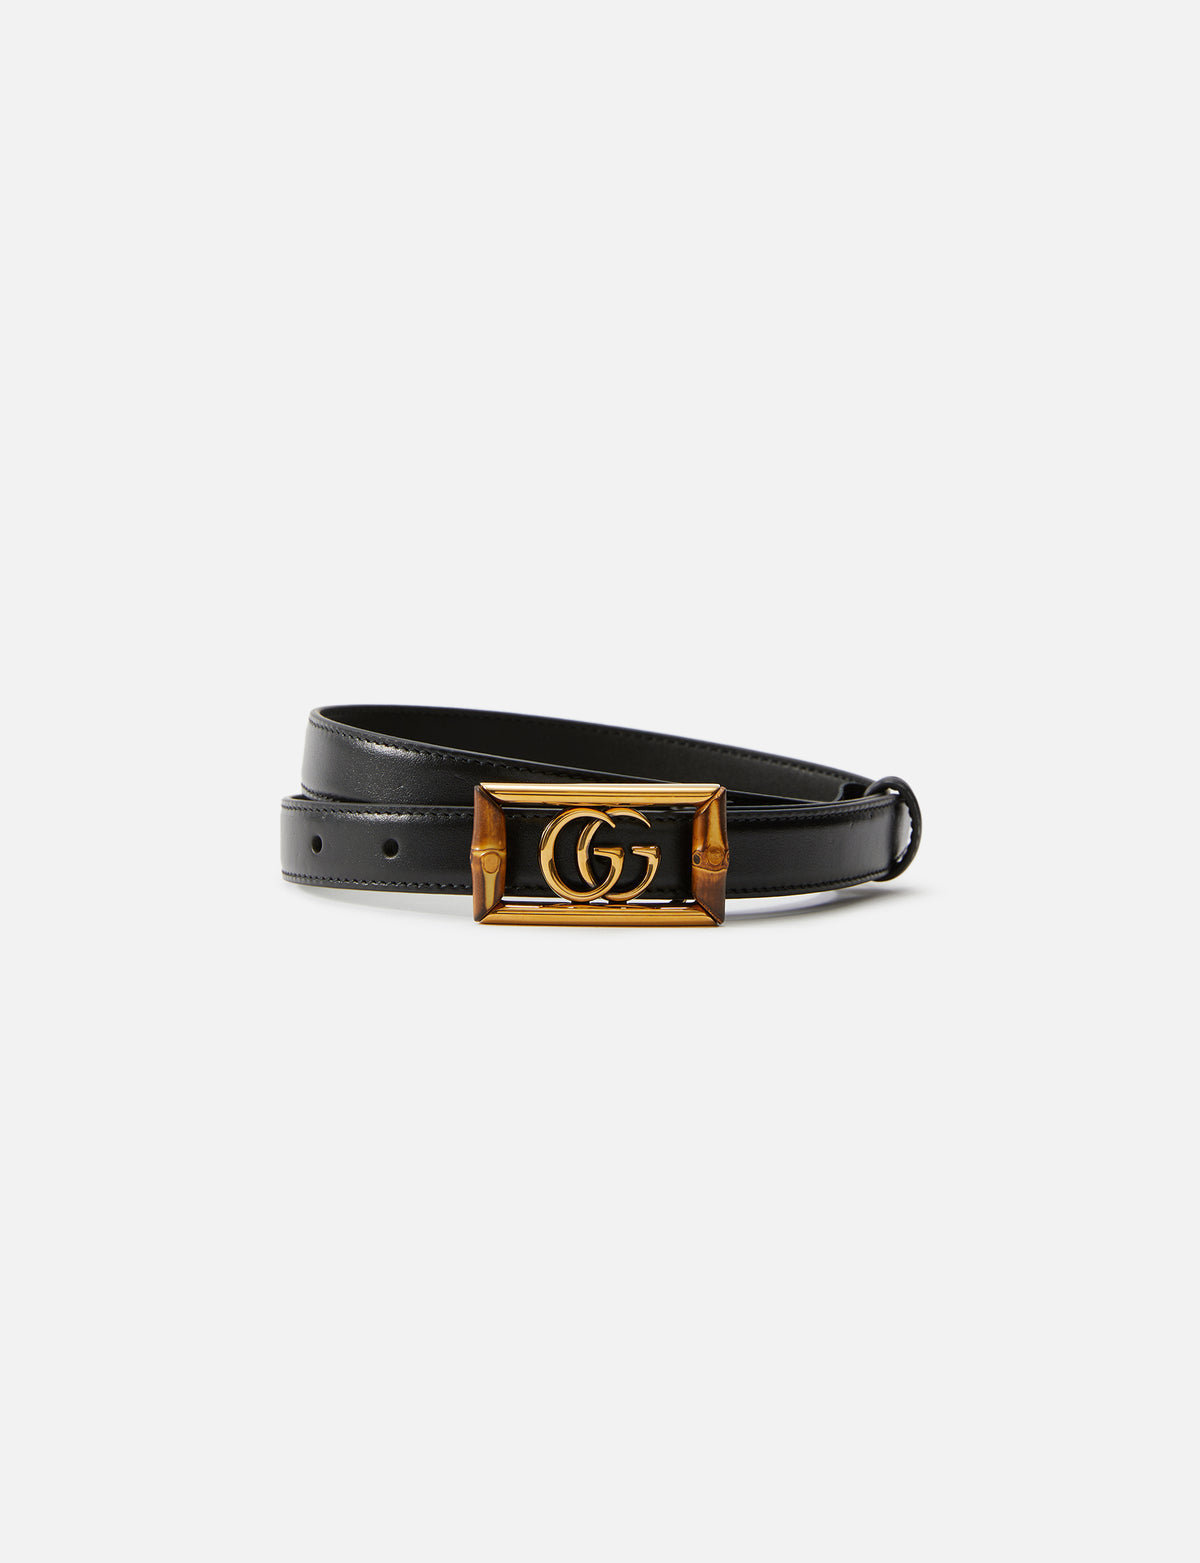 view 4 - Bamboo GG Marmont Belt